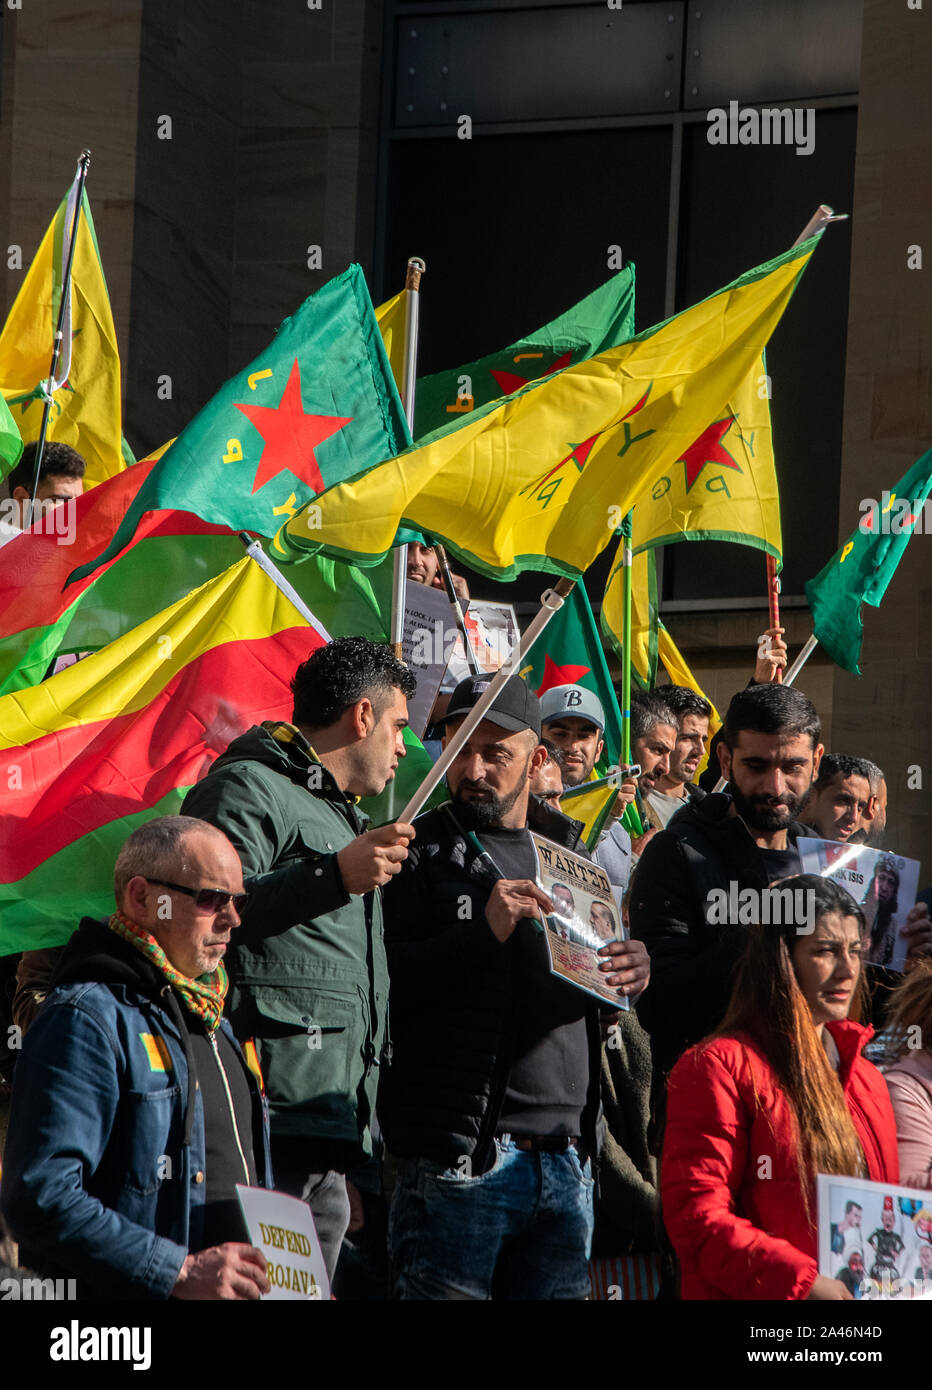 Glasgow, Scotland, UK. 12th October 2019: People protesting against the Turkish occupation and ethnic cleansing of the Kurds. Stock Photo